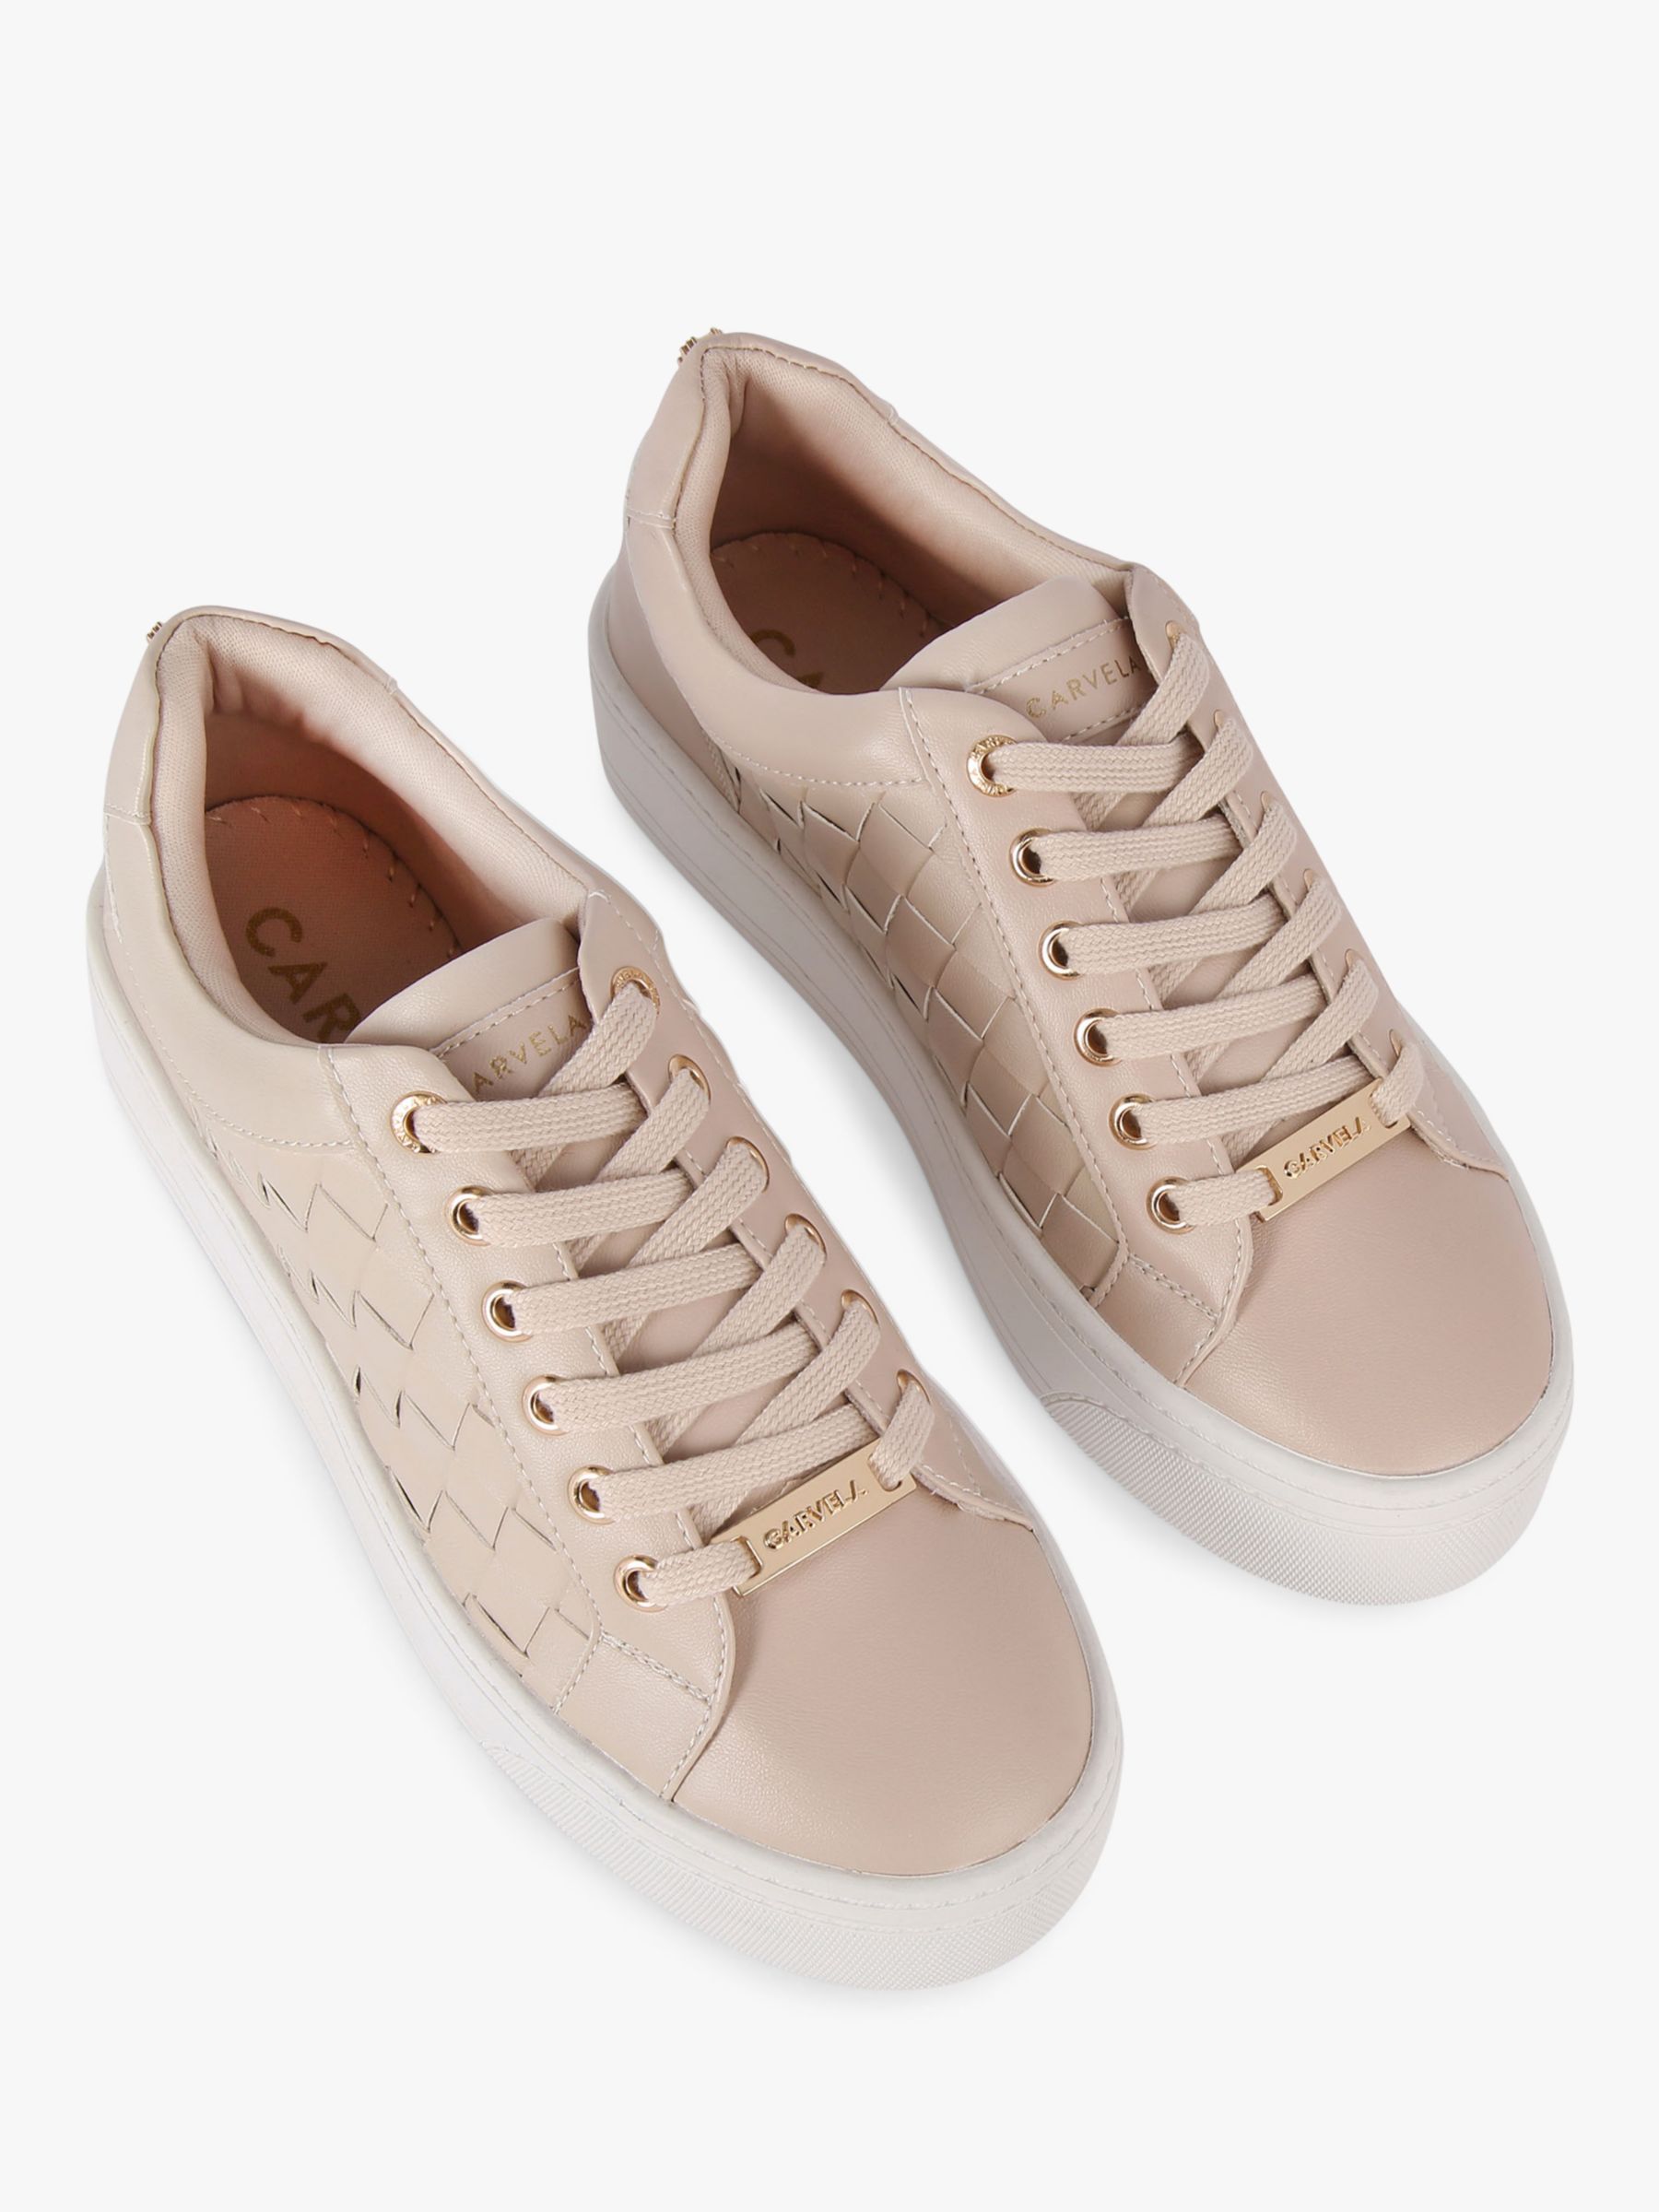 Buy Carvela Checker Trainers Online at johnlewis.com